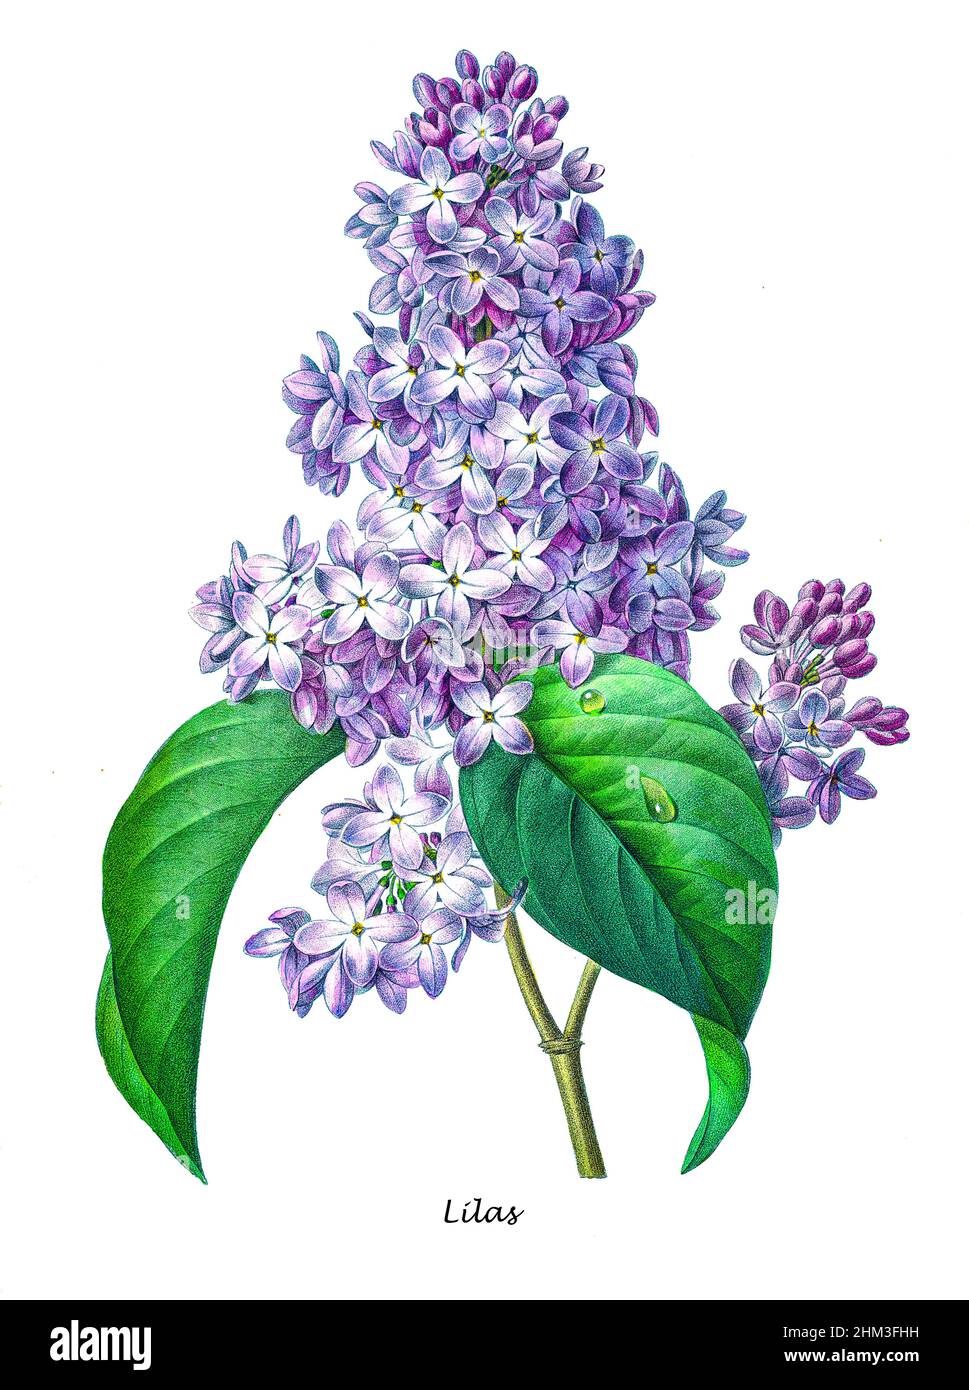 19th-century hand painted Engraving illustration of a Lilac (Lilas) (Syringa vulgaris) (flower, by Pierre-Joseph Redoute. Published in Choix Des Plus Belles Fleurs, Paris (1827). by Redouté, Pierre Joseph, 1759-1840.; Chapuis, Jean Baptiste.; Ernest Panckoucke.; Langois, Dr.; Bessin, R.; Victor, fl. ca. 1820-1850. Stock Photo